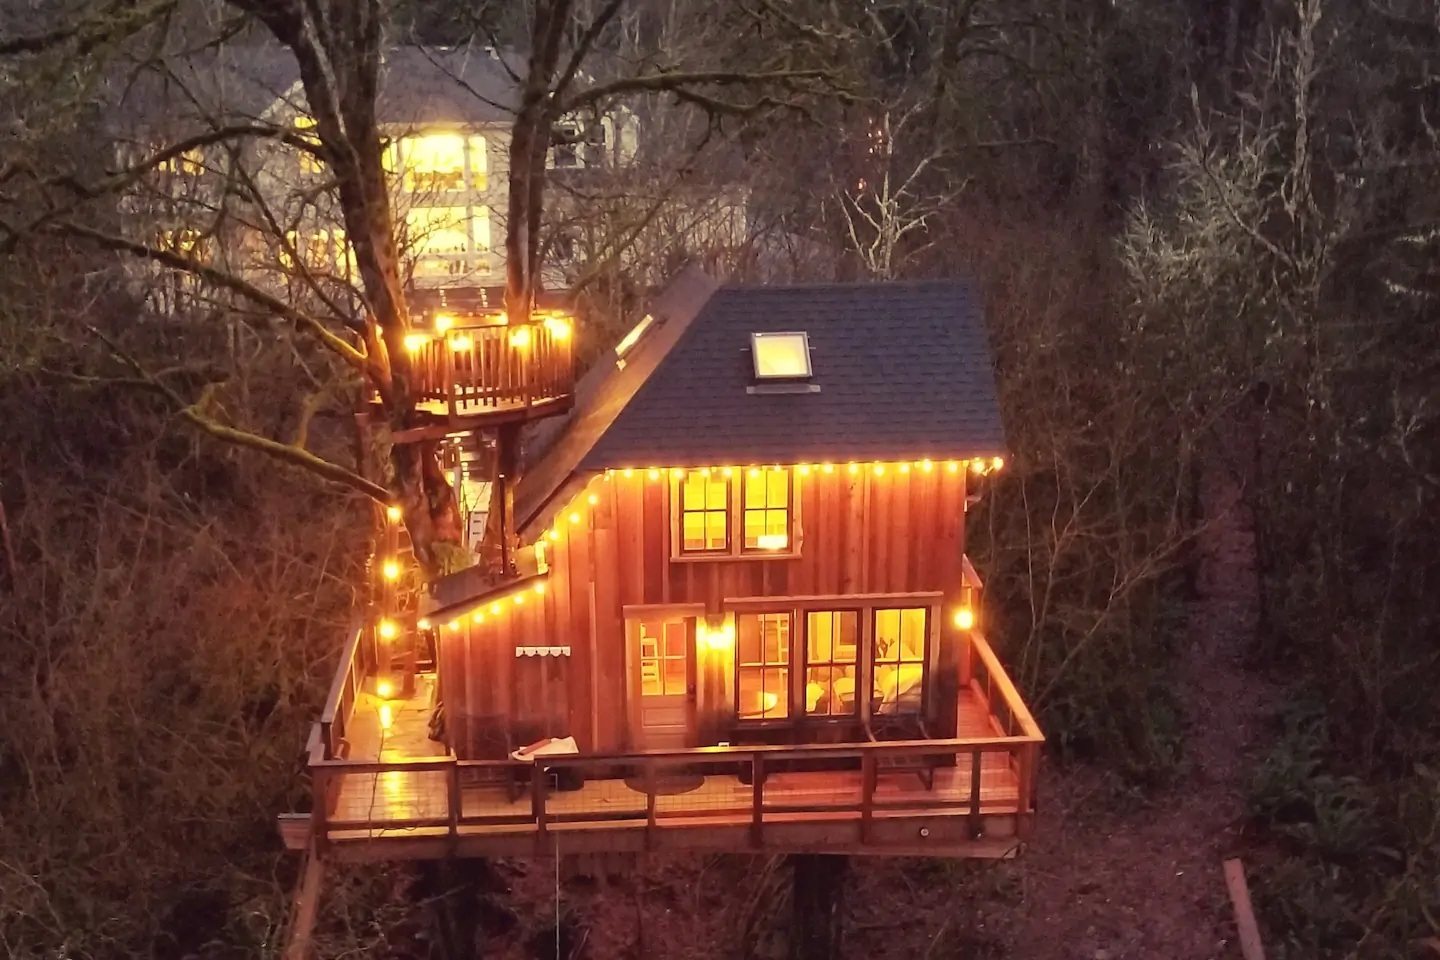 Original Treehouse features on THM